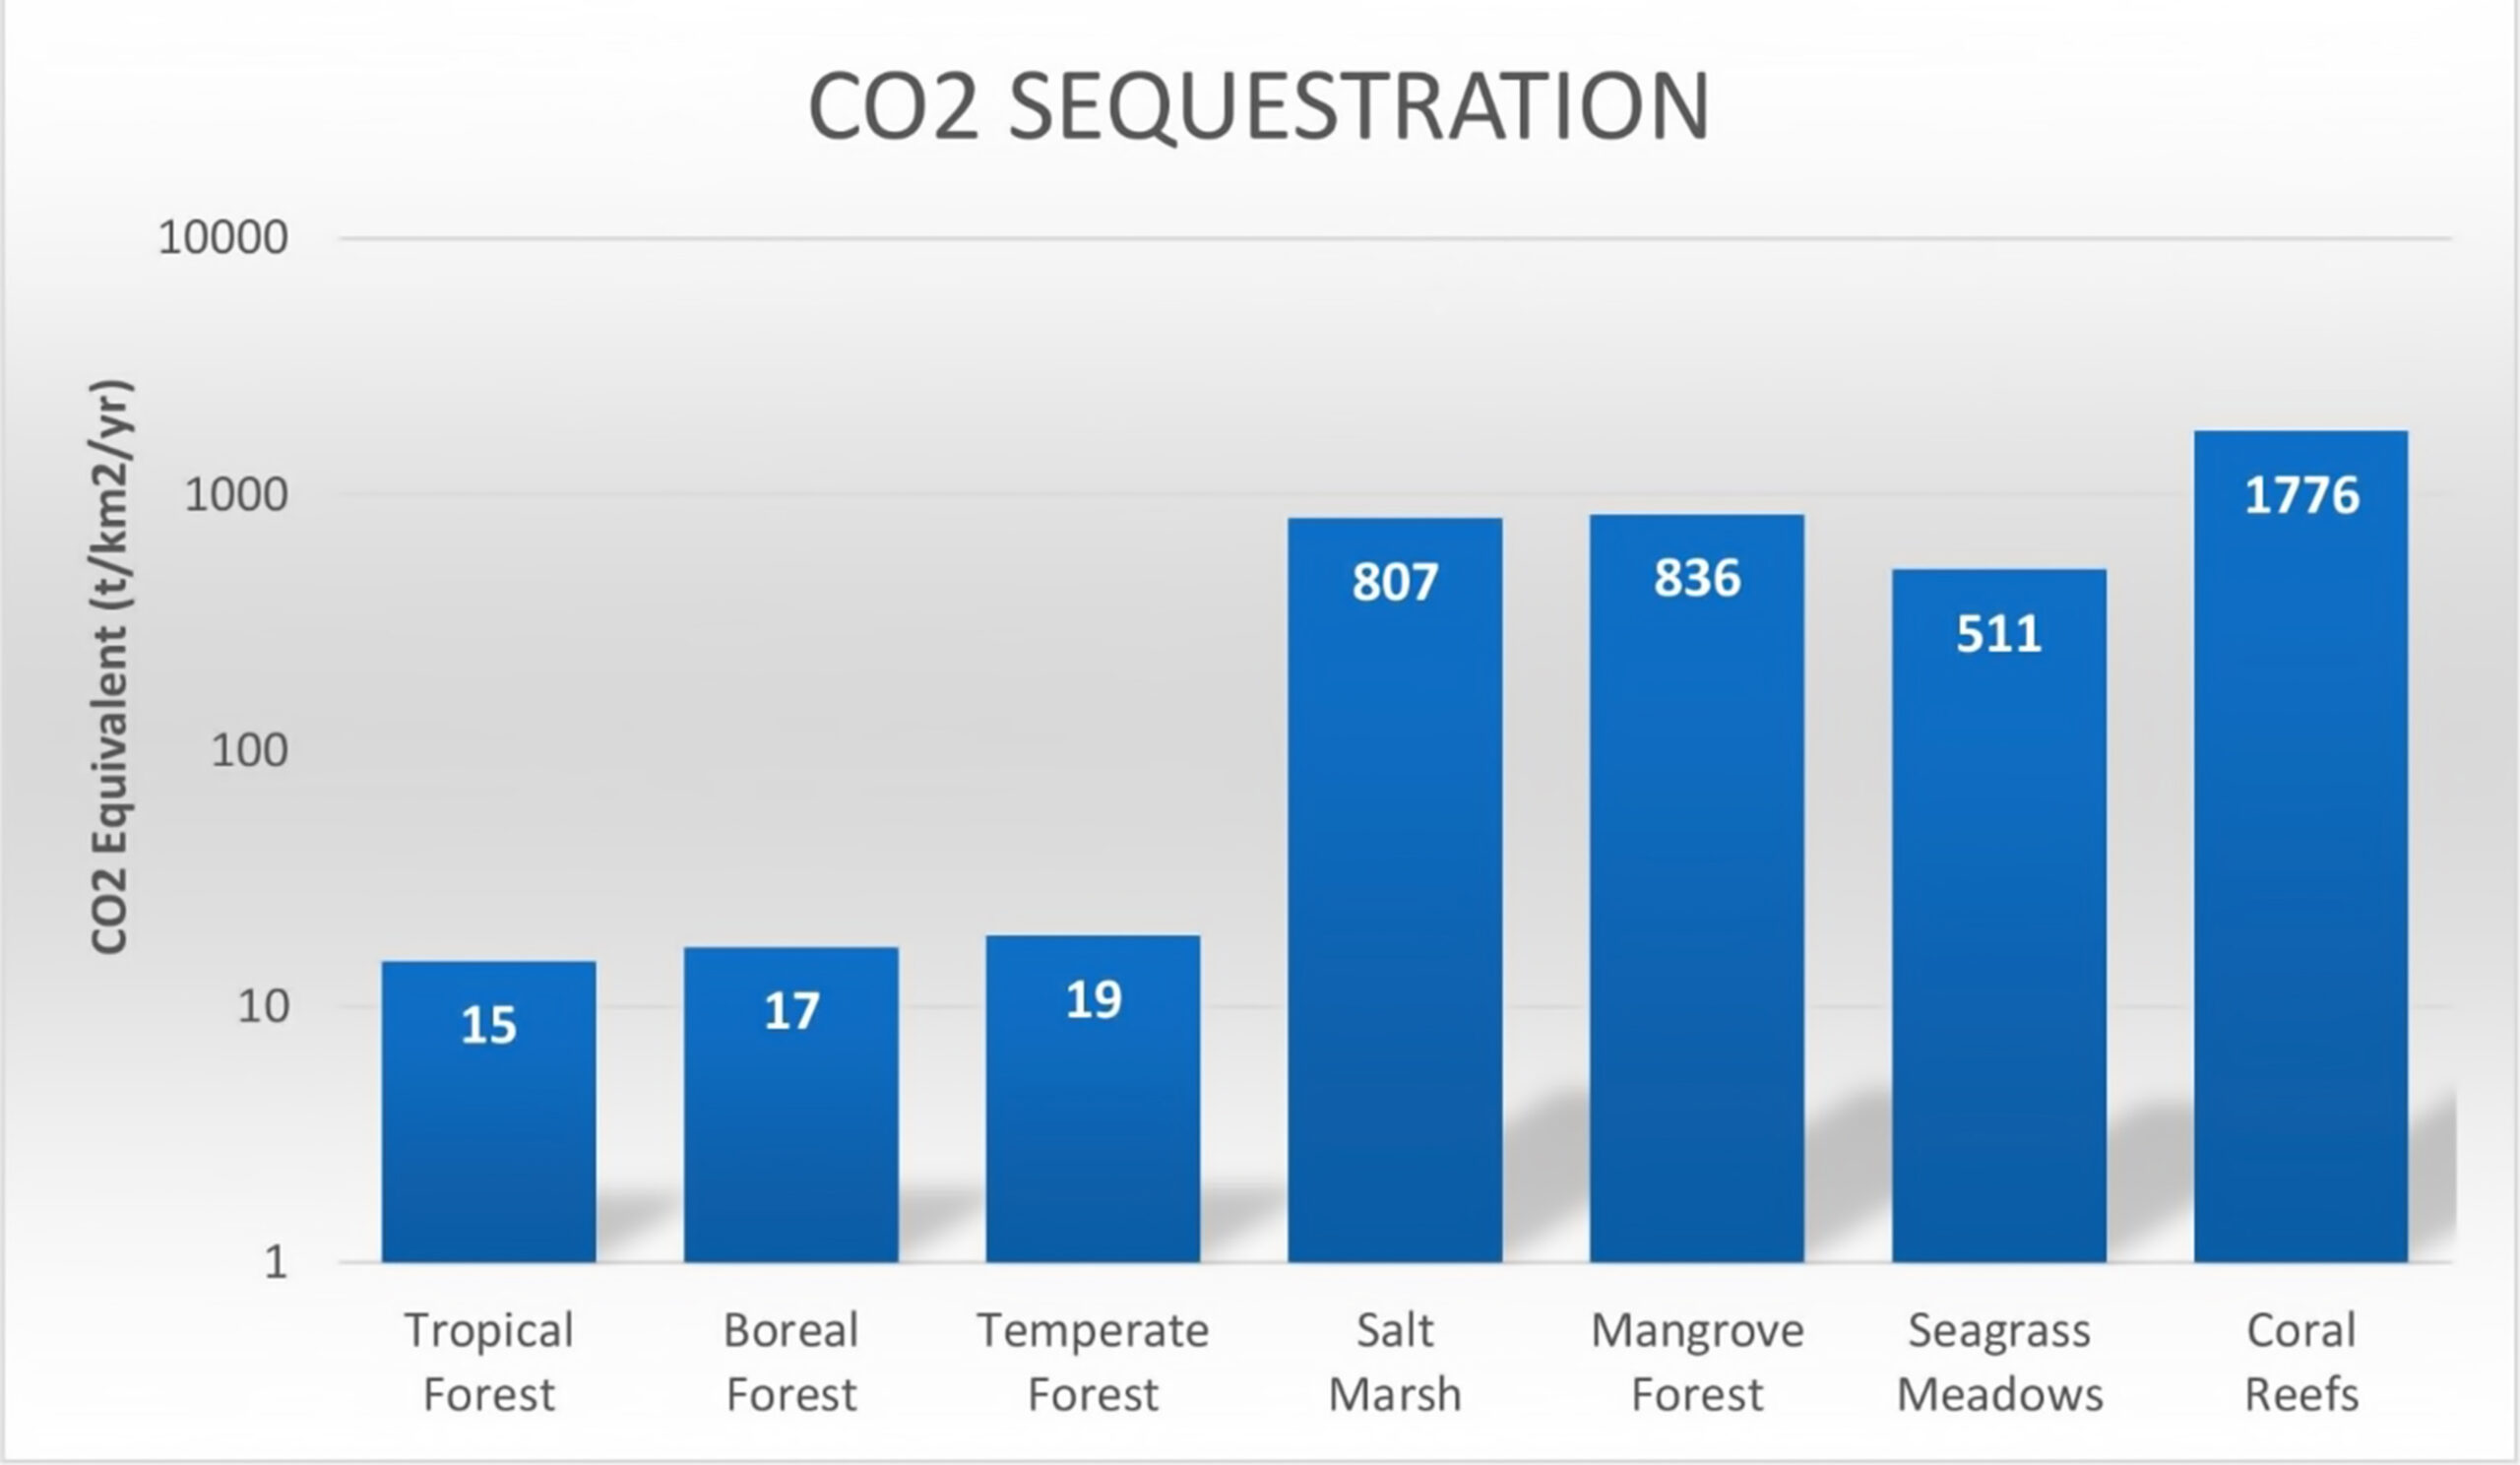 Mean long-term rates of carbon sequestration in CO2-Equivalents(tCO2/km2/yr) in soils in terrestrial forests, sediments in coastal vegetated ecosystems, and coral reefs. Rates do not include carbon liberated through calcification in these marine environments as these vary widely. Note the logarithmic scale of the y axis. Original data converted from: McLeod et al. 2011, Smith and Kinsey, 1976; Buddemeier and Smith, 1988; Kinsey and Hopley, 1991.